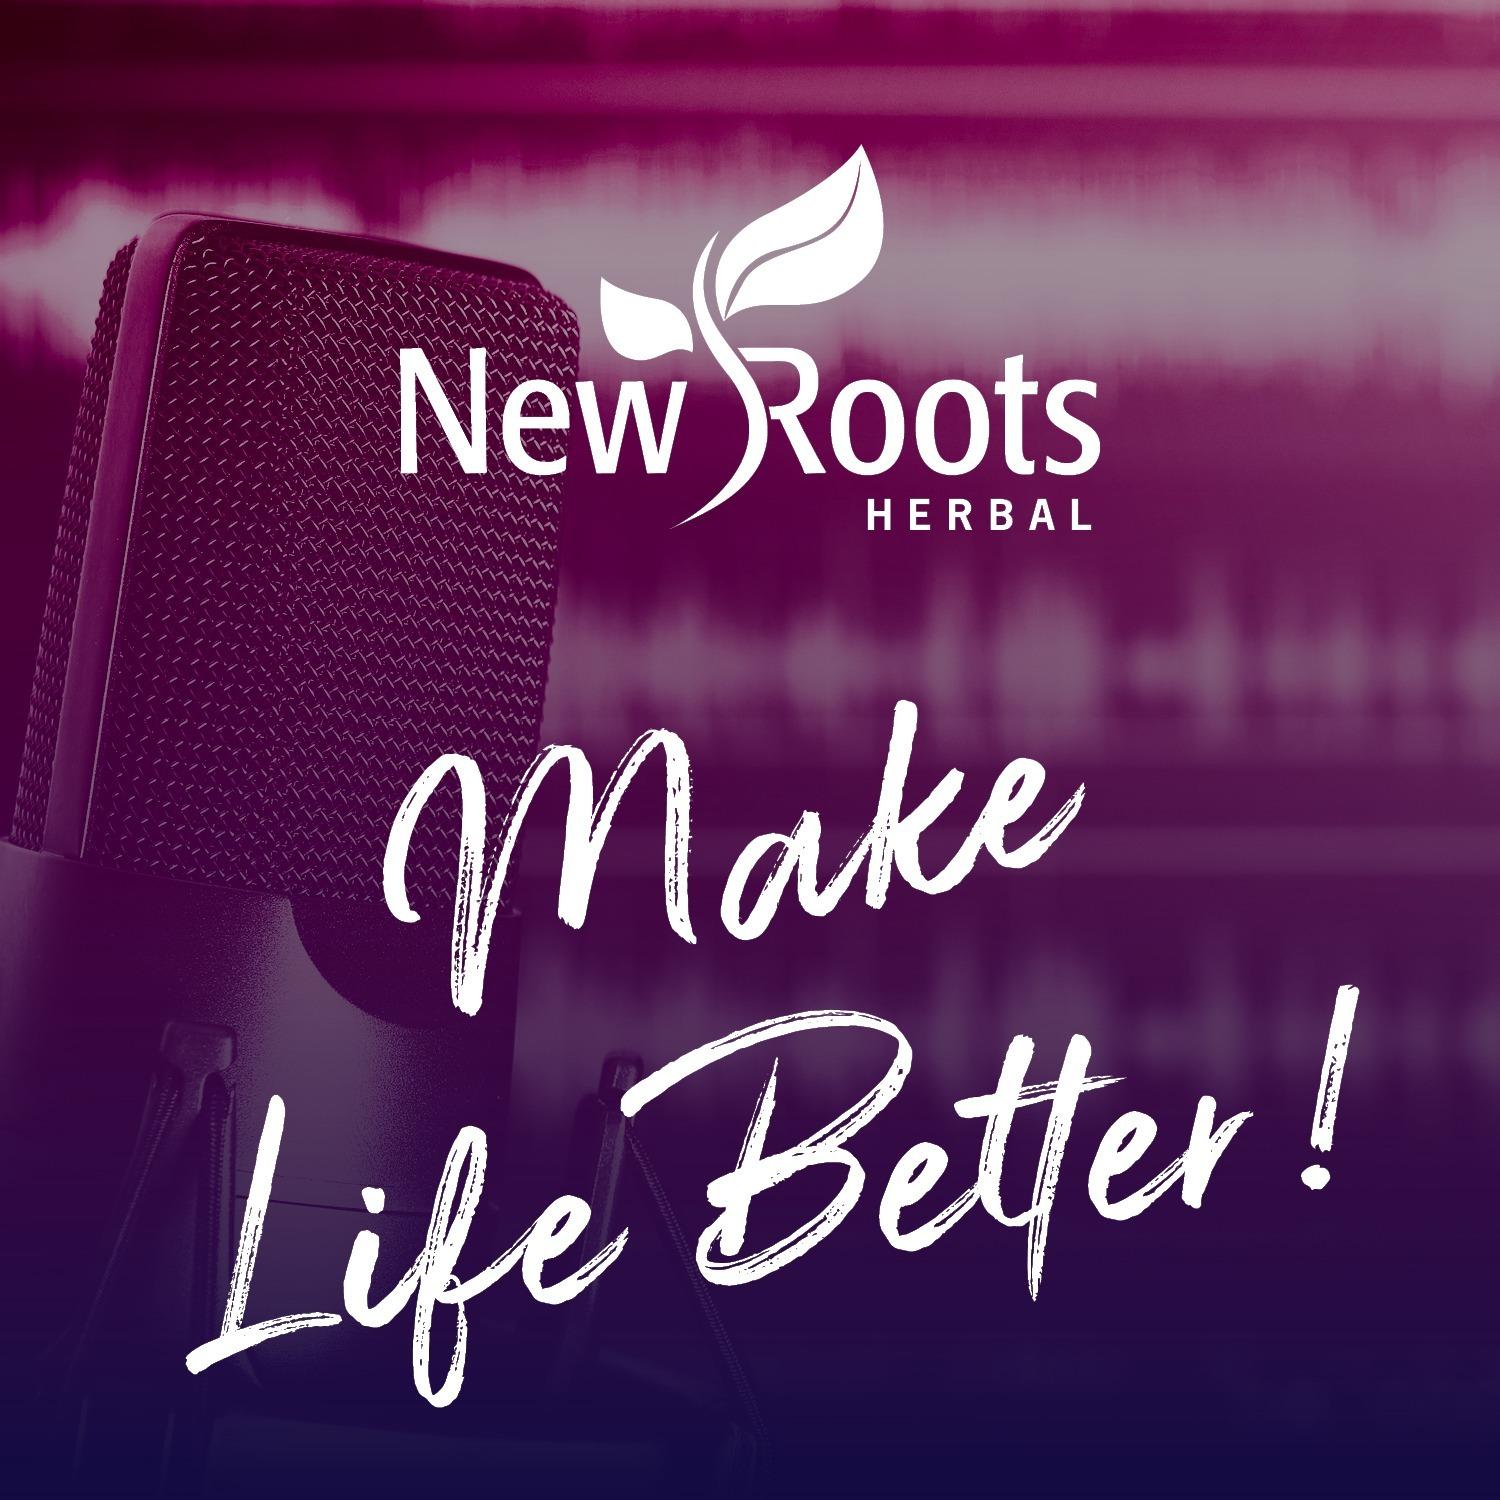 Make life Better - Your Guide to Natural Health and Wellness - At New Roots Herbal, we are inspired by nature, and driven by science to make life better – Join us to discover quality natural products, remedies, and expert advice to live your best life.